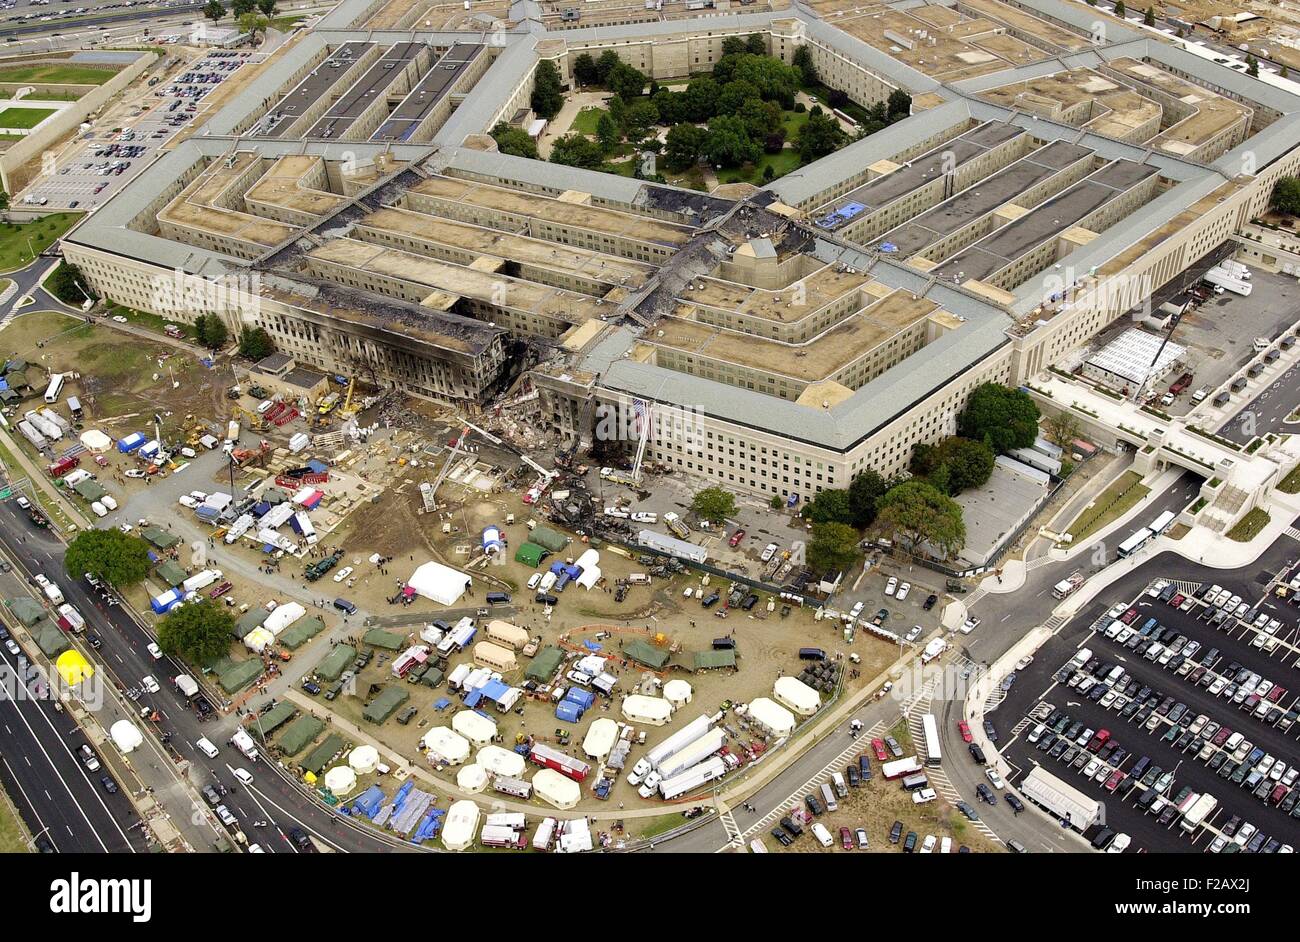 Aerial view of the Pentagon on Sept. 14, 2001, three days after 9-11 attacks. American Airlines Flight 77 crash caused severe damage to the outer ring of the west face. 64 aboard the aircraft were killed, along with 125 people in the Pentagon. Arlington, Virginia, after September 11, 2001 terrorist attacks. (BSLOC 2015 2 75) Stock Photo